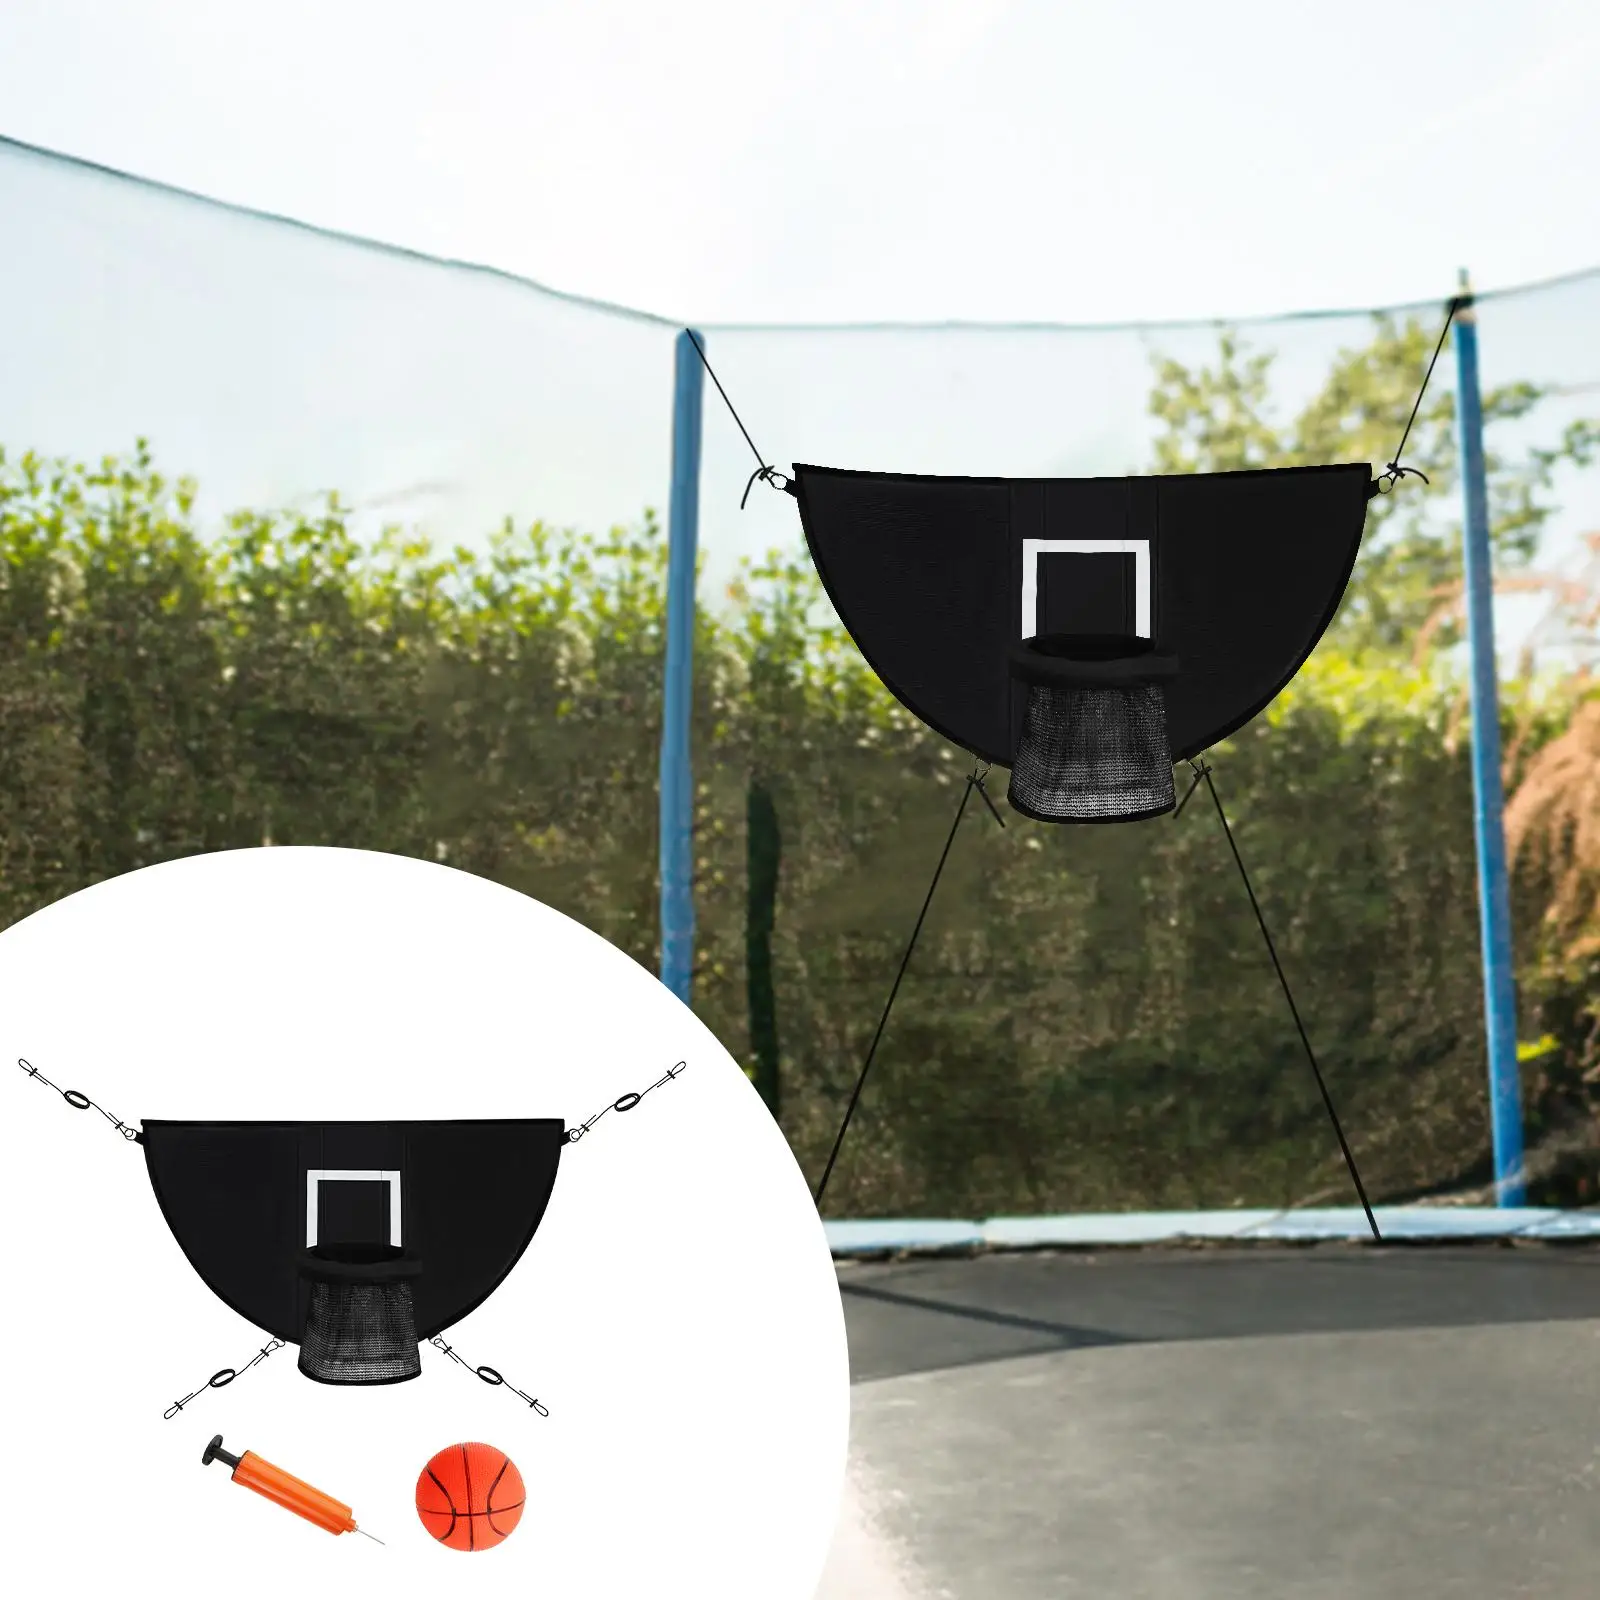 Trampoline Basketball Easy to Assemble Waterproof with Mini Basketball